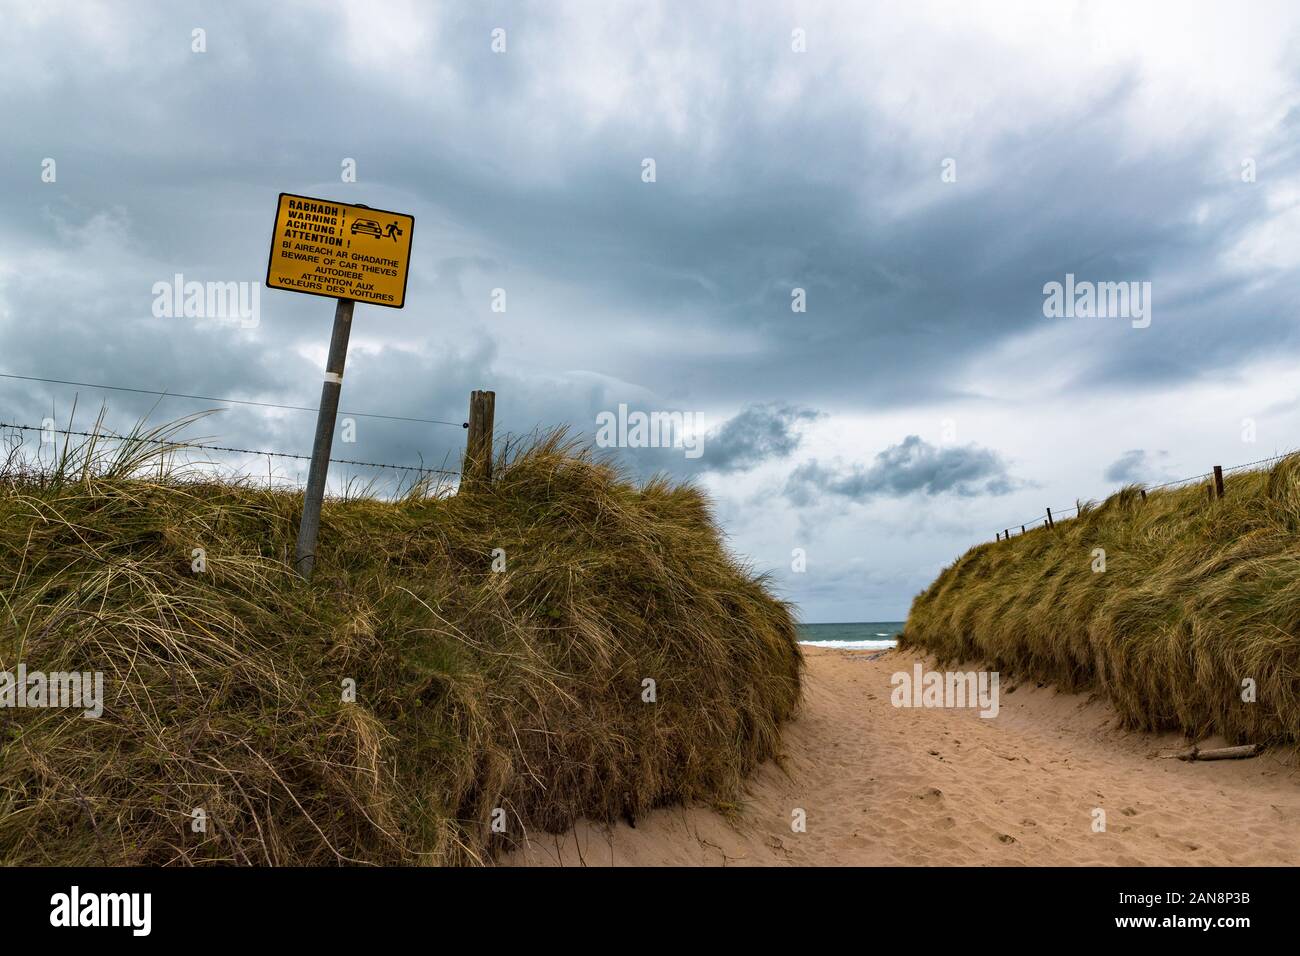 Beware of car thieves warning sign on an isolated rual beach on the west coast of Ireland Stock Photo